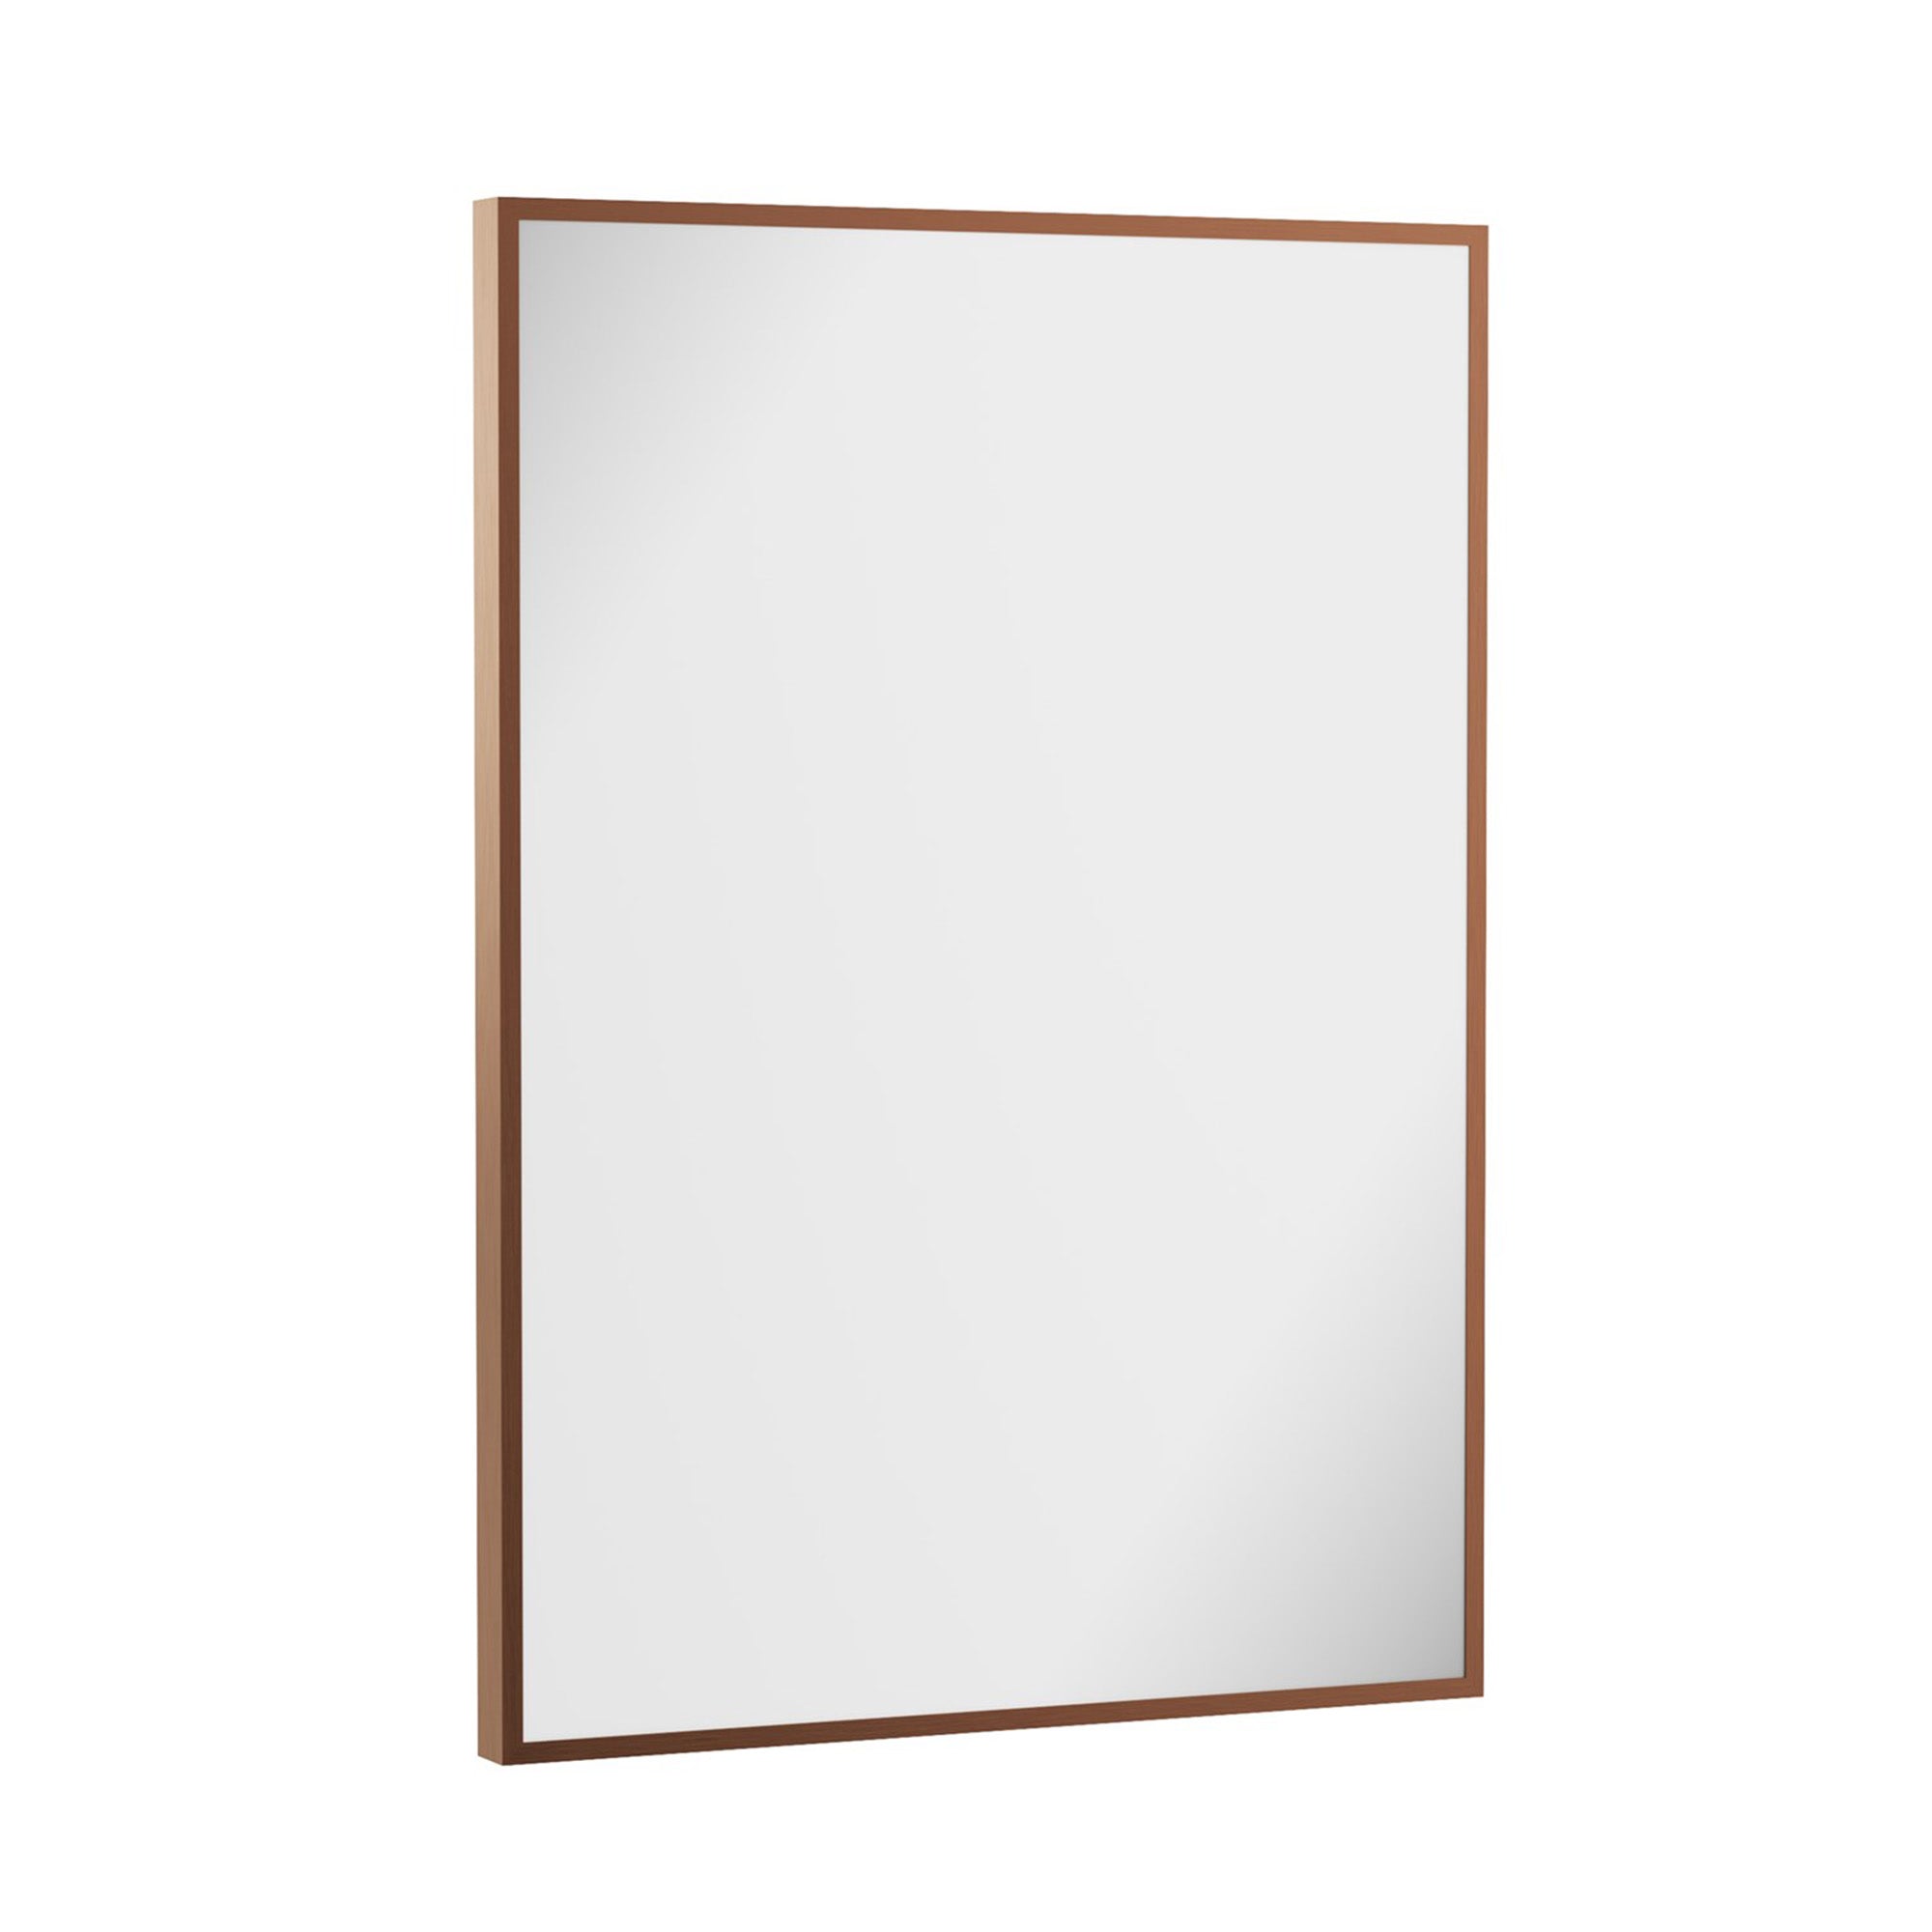 crosswater mpro non led mirror 500x700mm brushed bronze